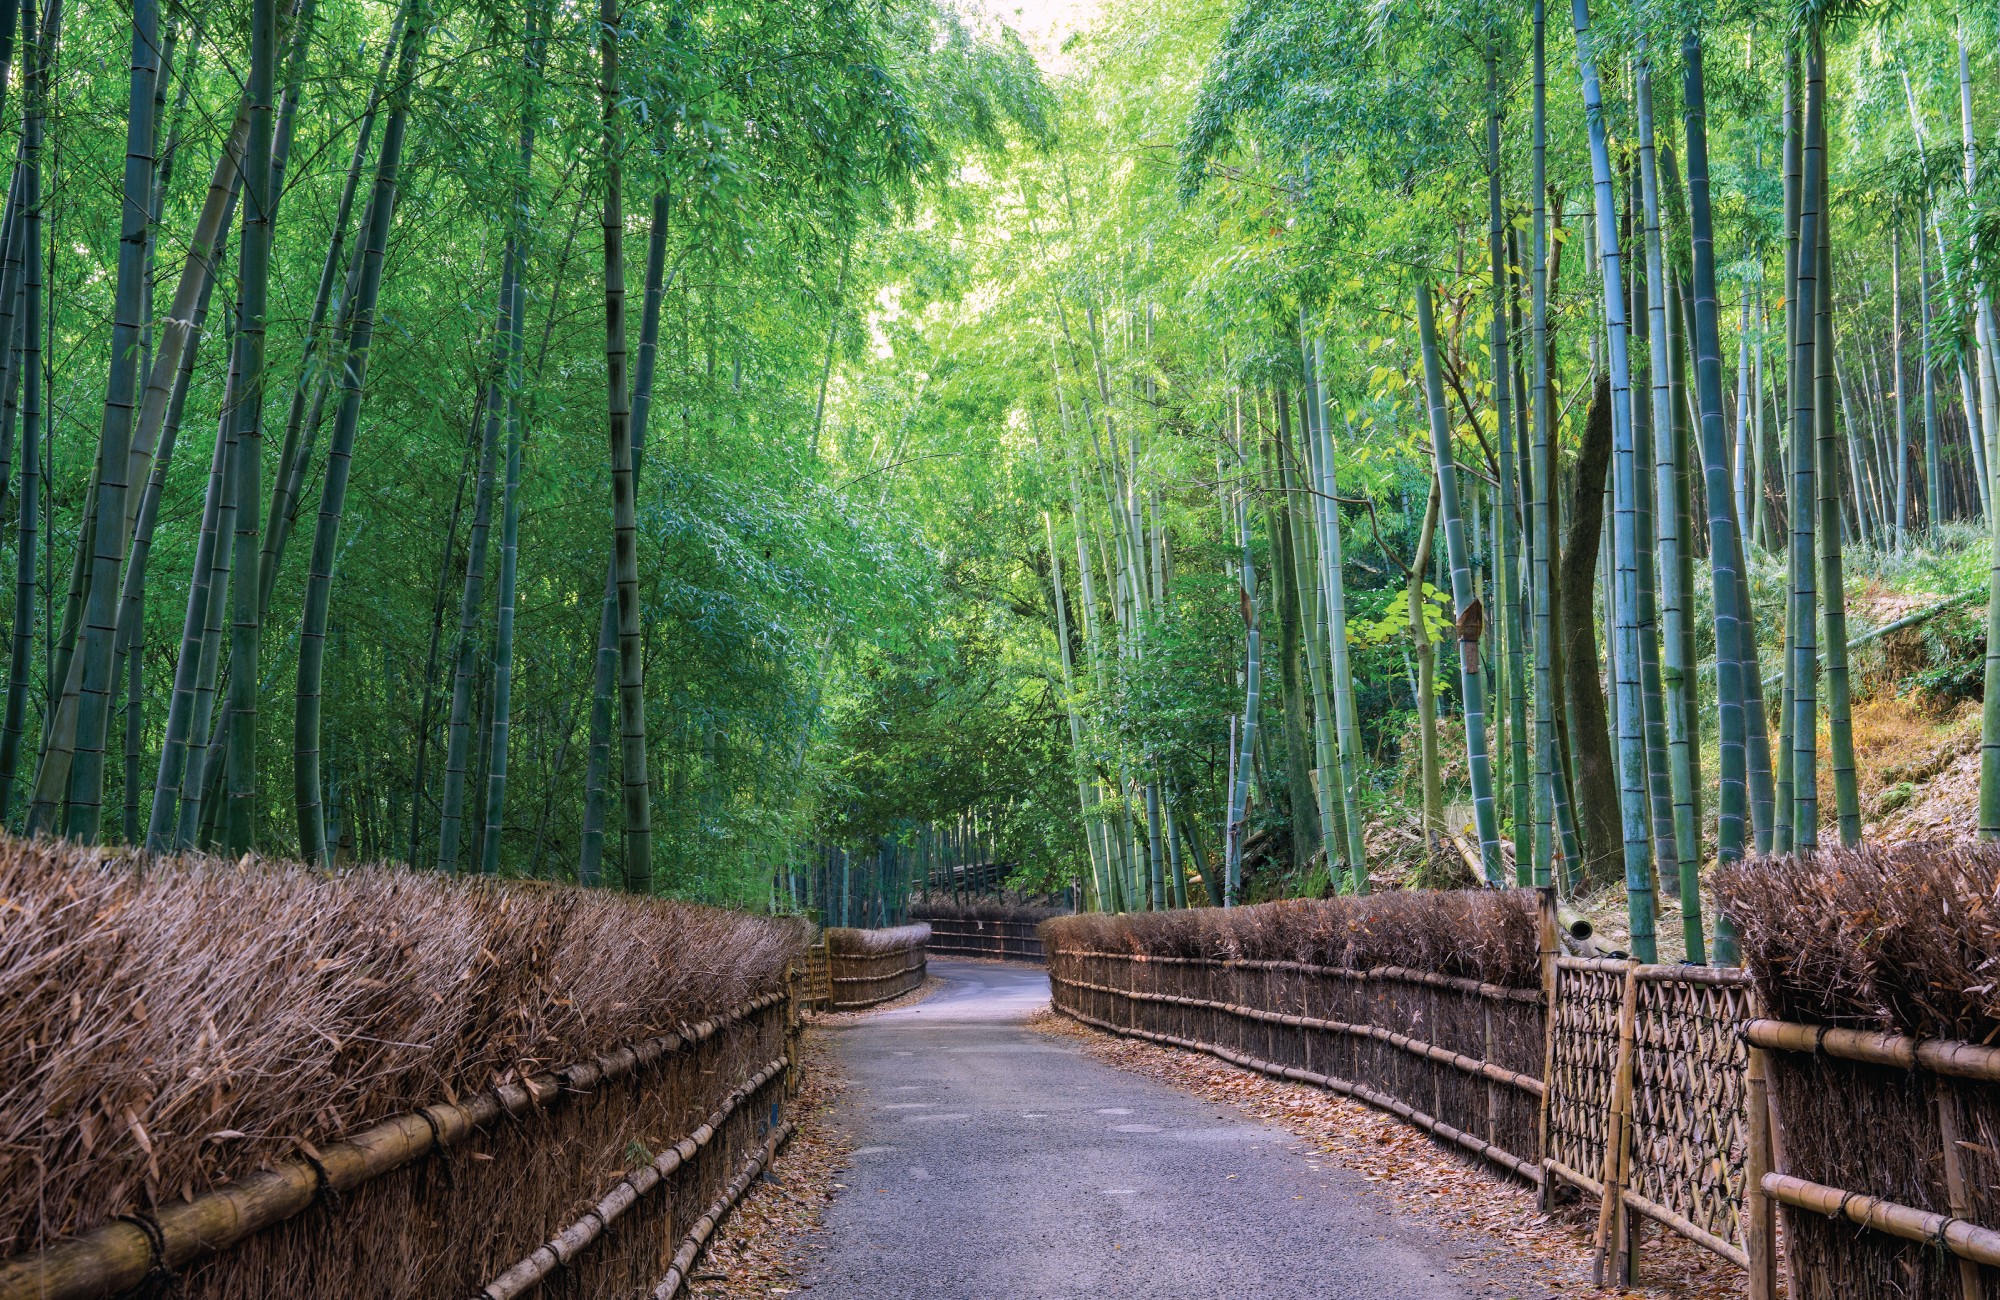 There are over tens of thousands of bamboo in the area, some standing more than 10m tall. 